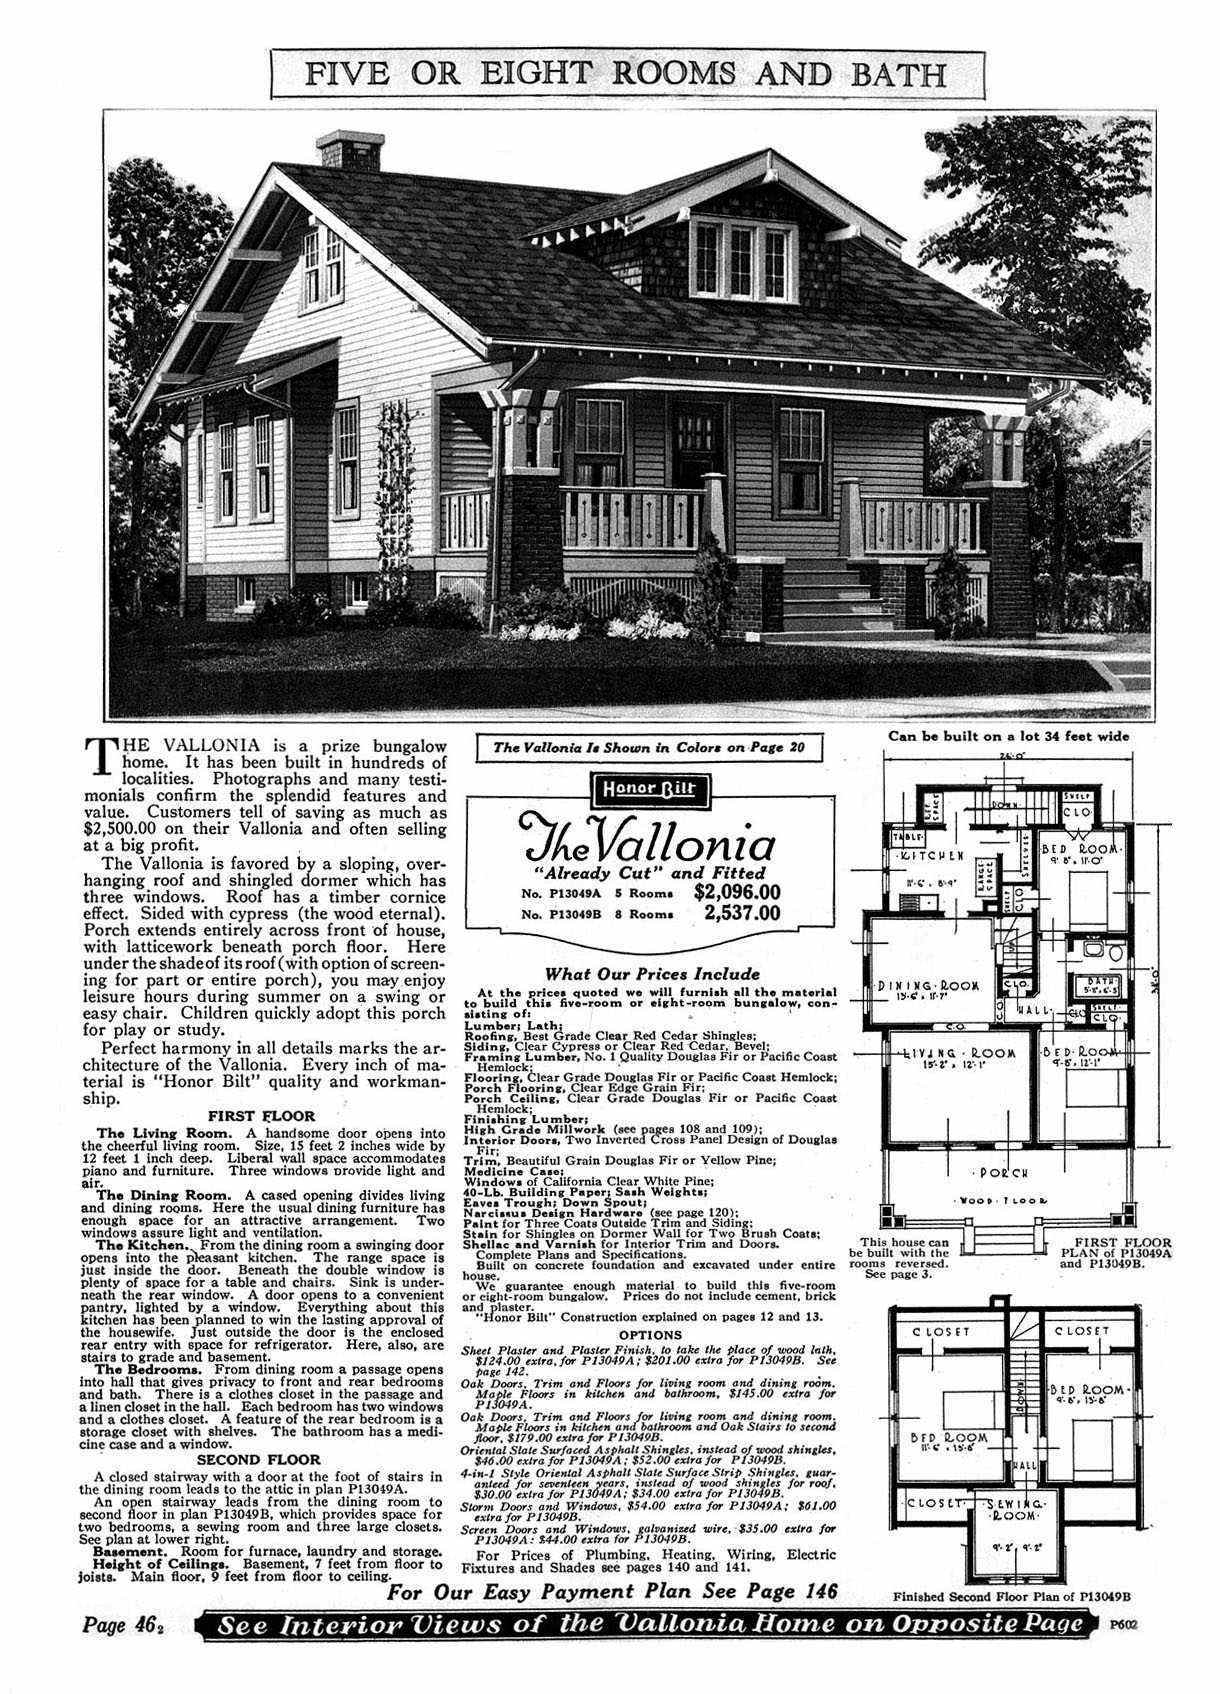 7329 W NORTH AVE, a Bungalow house, built in Wauwatosa, Wisconsin in 1921.